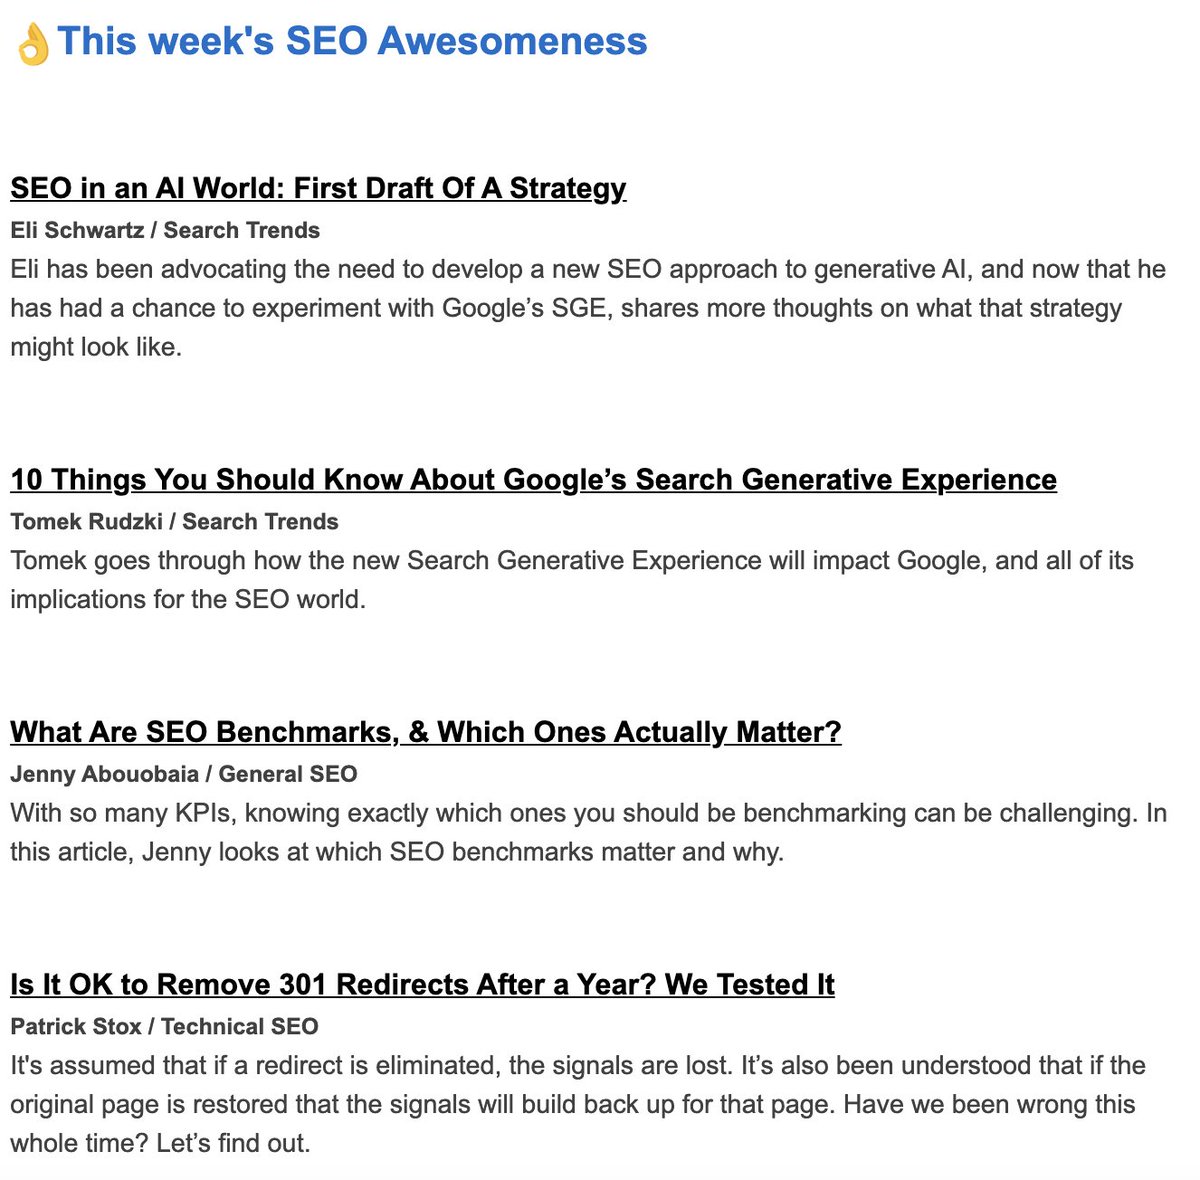 A new edition of #SEOFOMO has been sent to +26.2K SEOs & Digital Marketers with awesomeness from @5le @TomekRudzki @brodieseo @seowithjenny @patrickstox @JuliaEMcCoy and more! Check your emails or subscribe now: seofomo.co 😎📮 ...